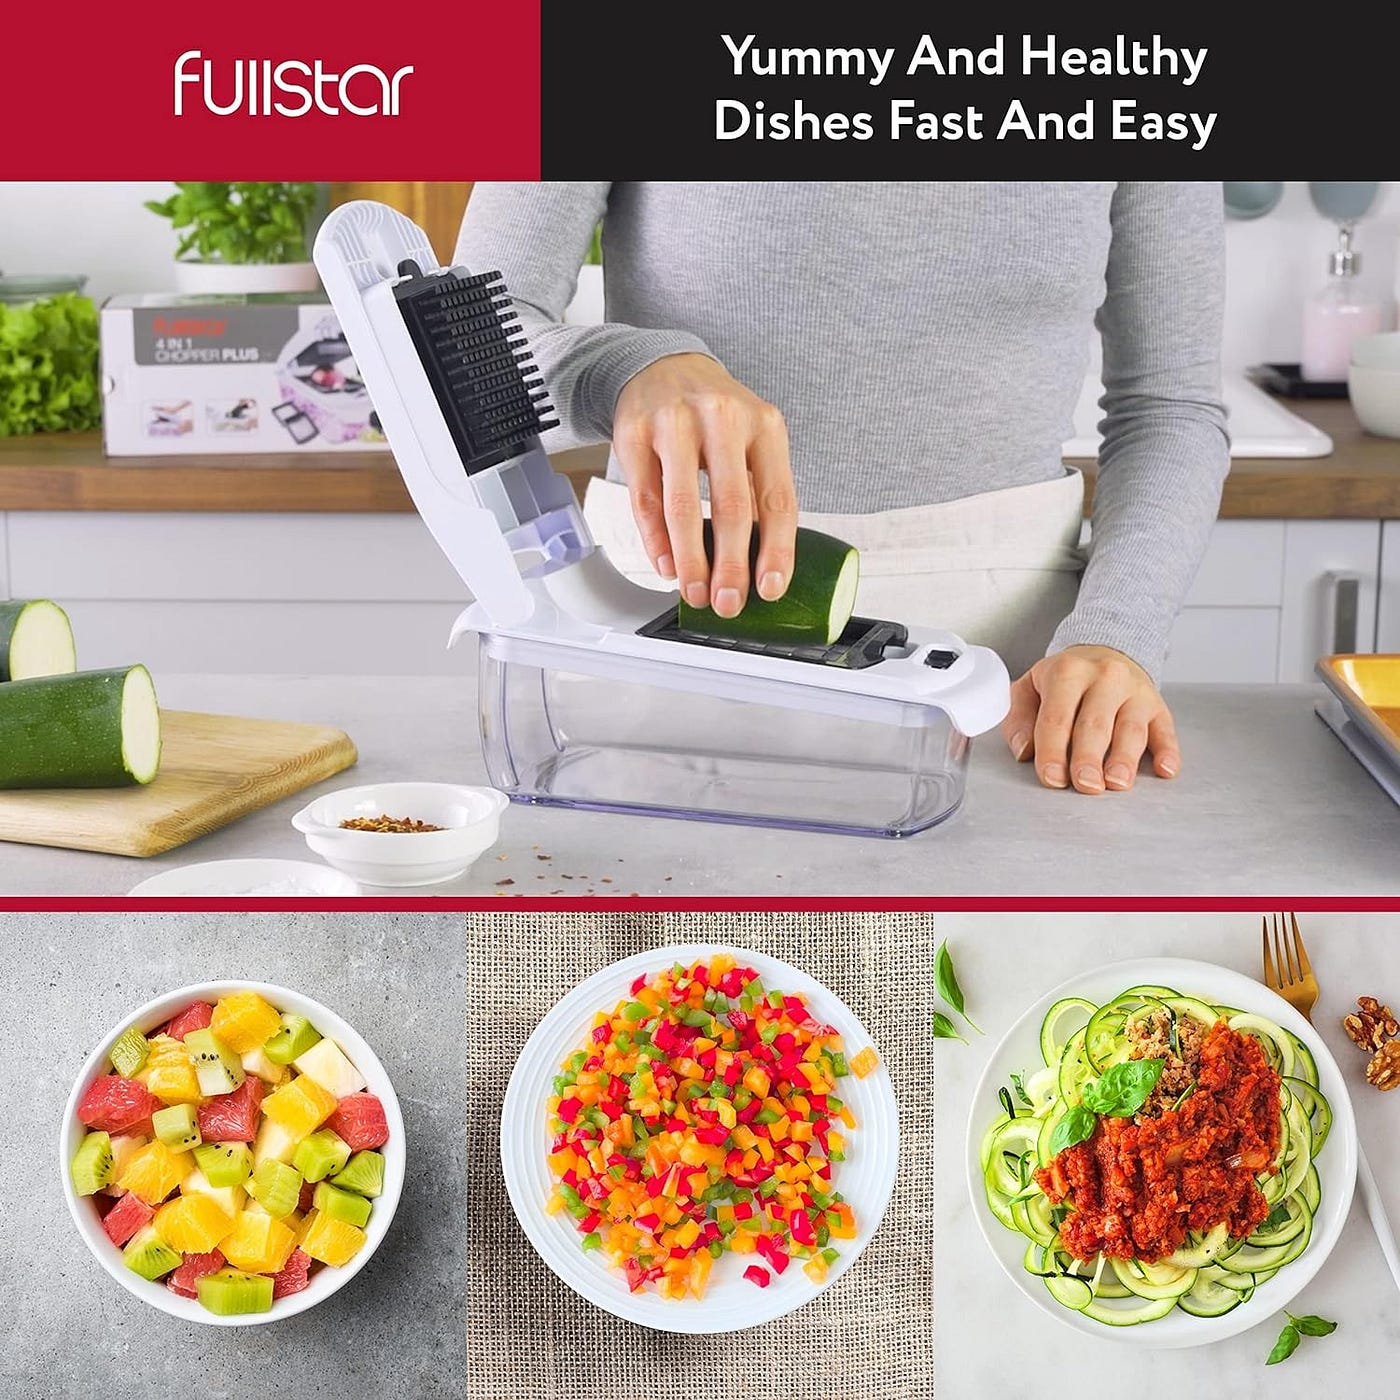 Save yourself time and stress in the kitchen with Fullstar's vegetable, veggie chopper